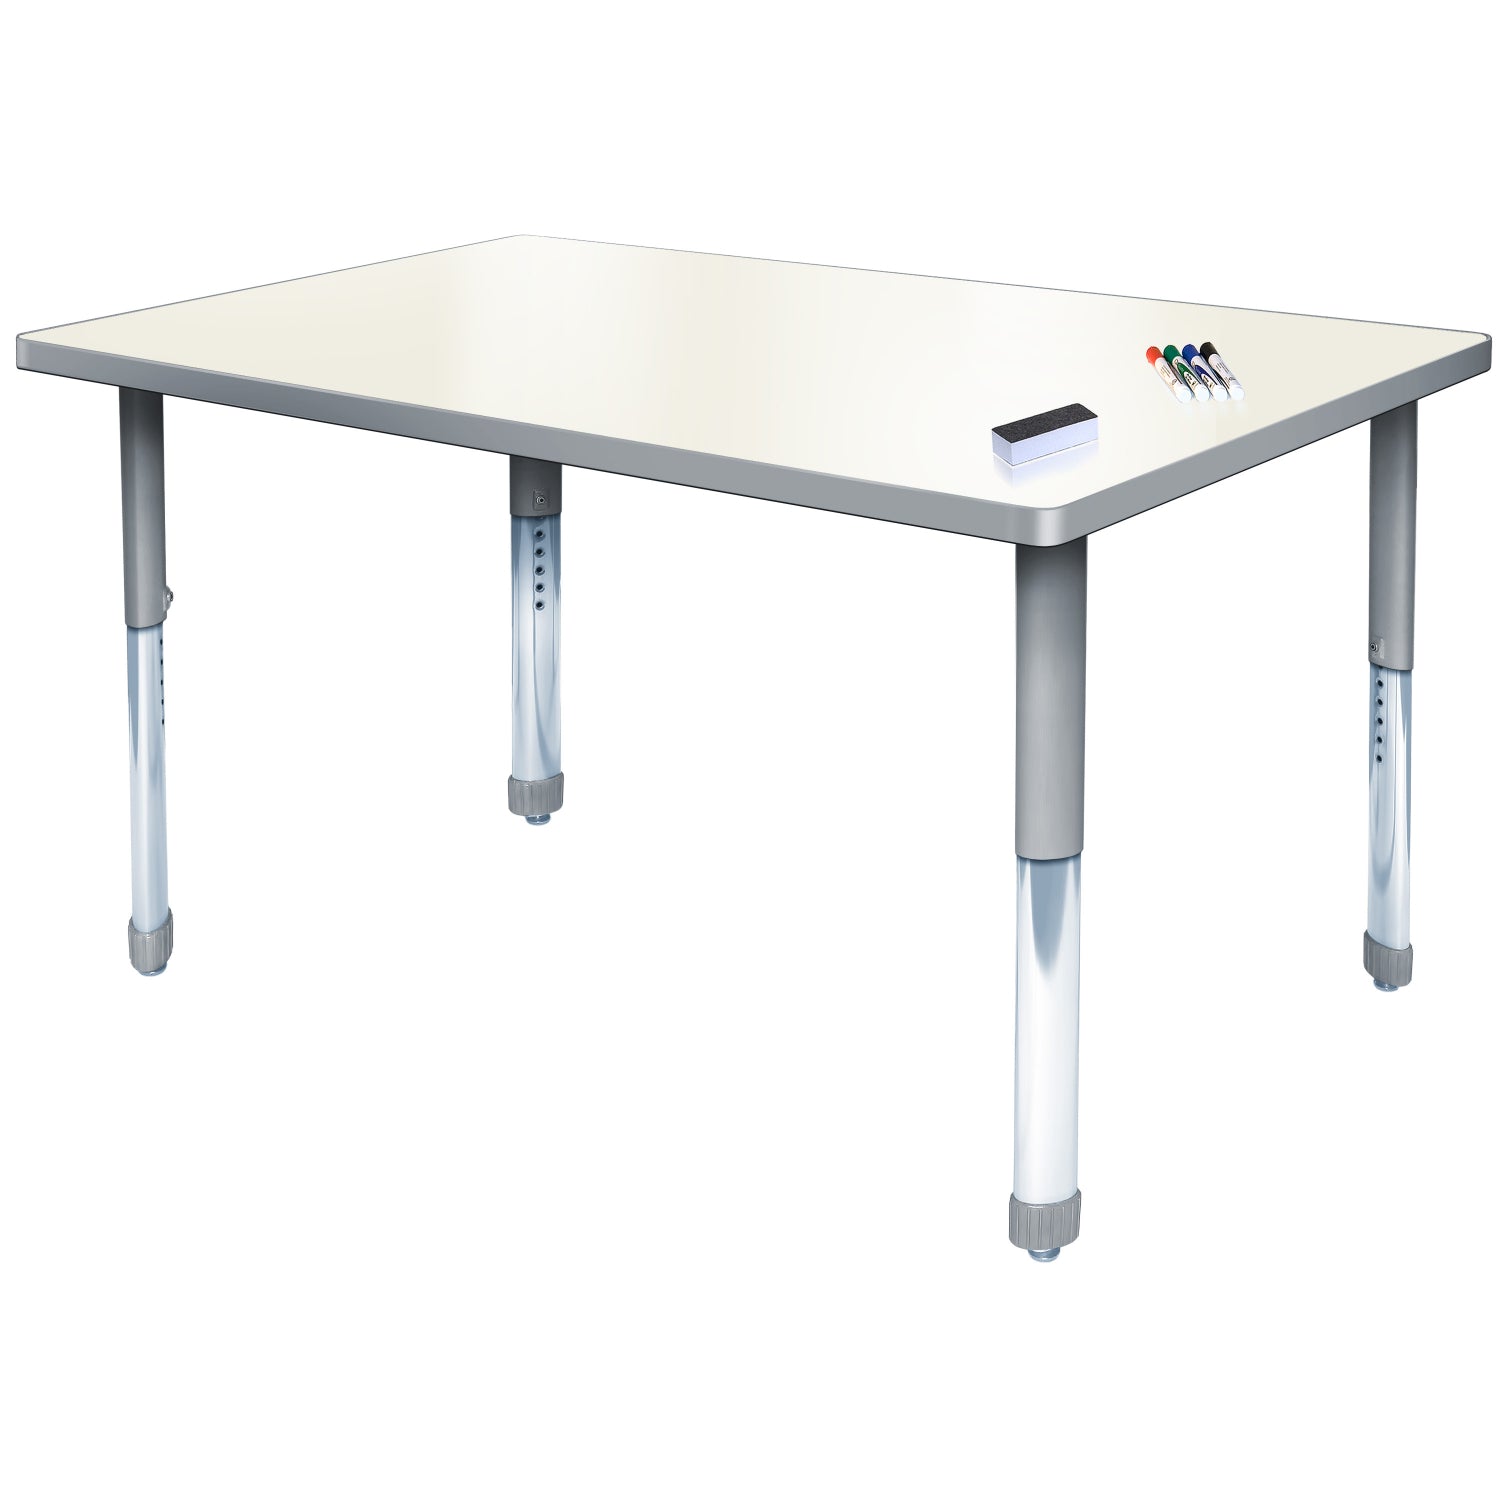 Aero Dry Erase Markerboard Activity Table, 30" x 72" Rectangle, Oval Adjustable Height Legs